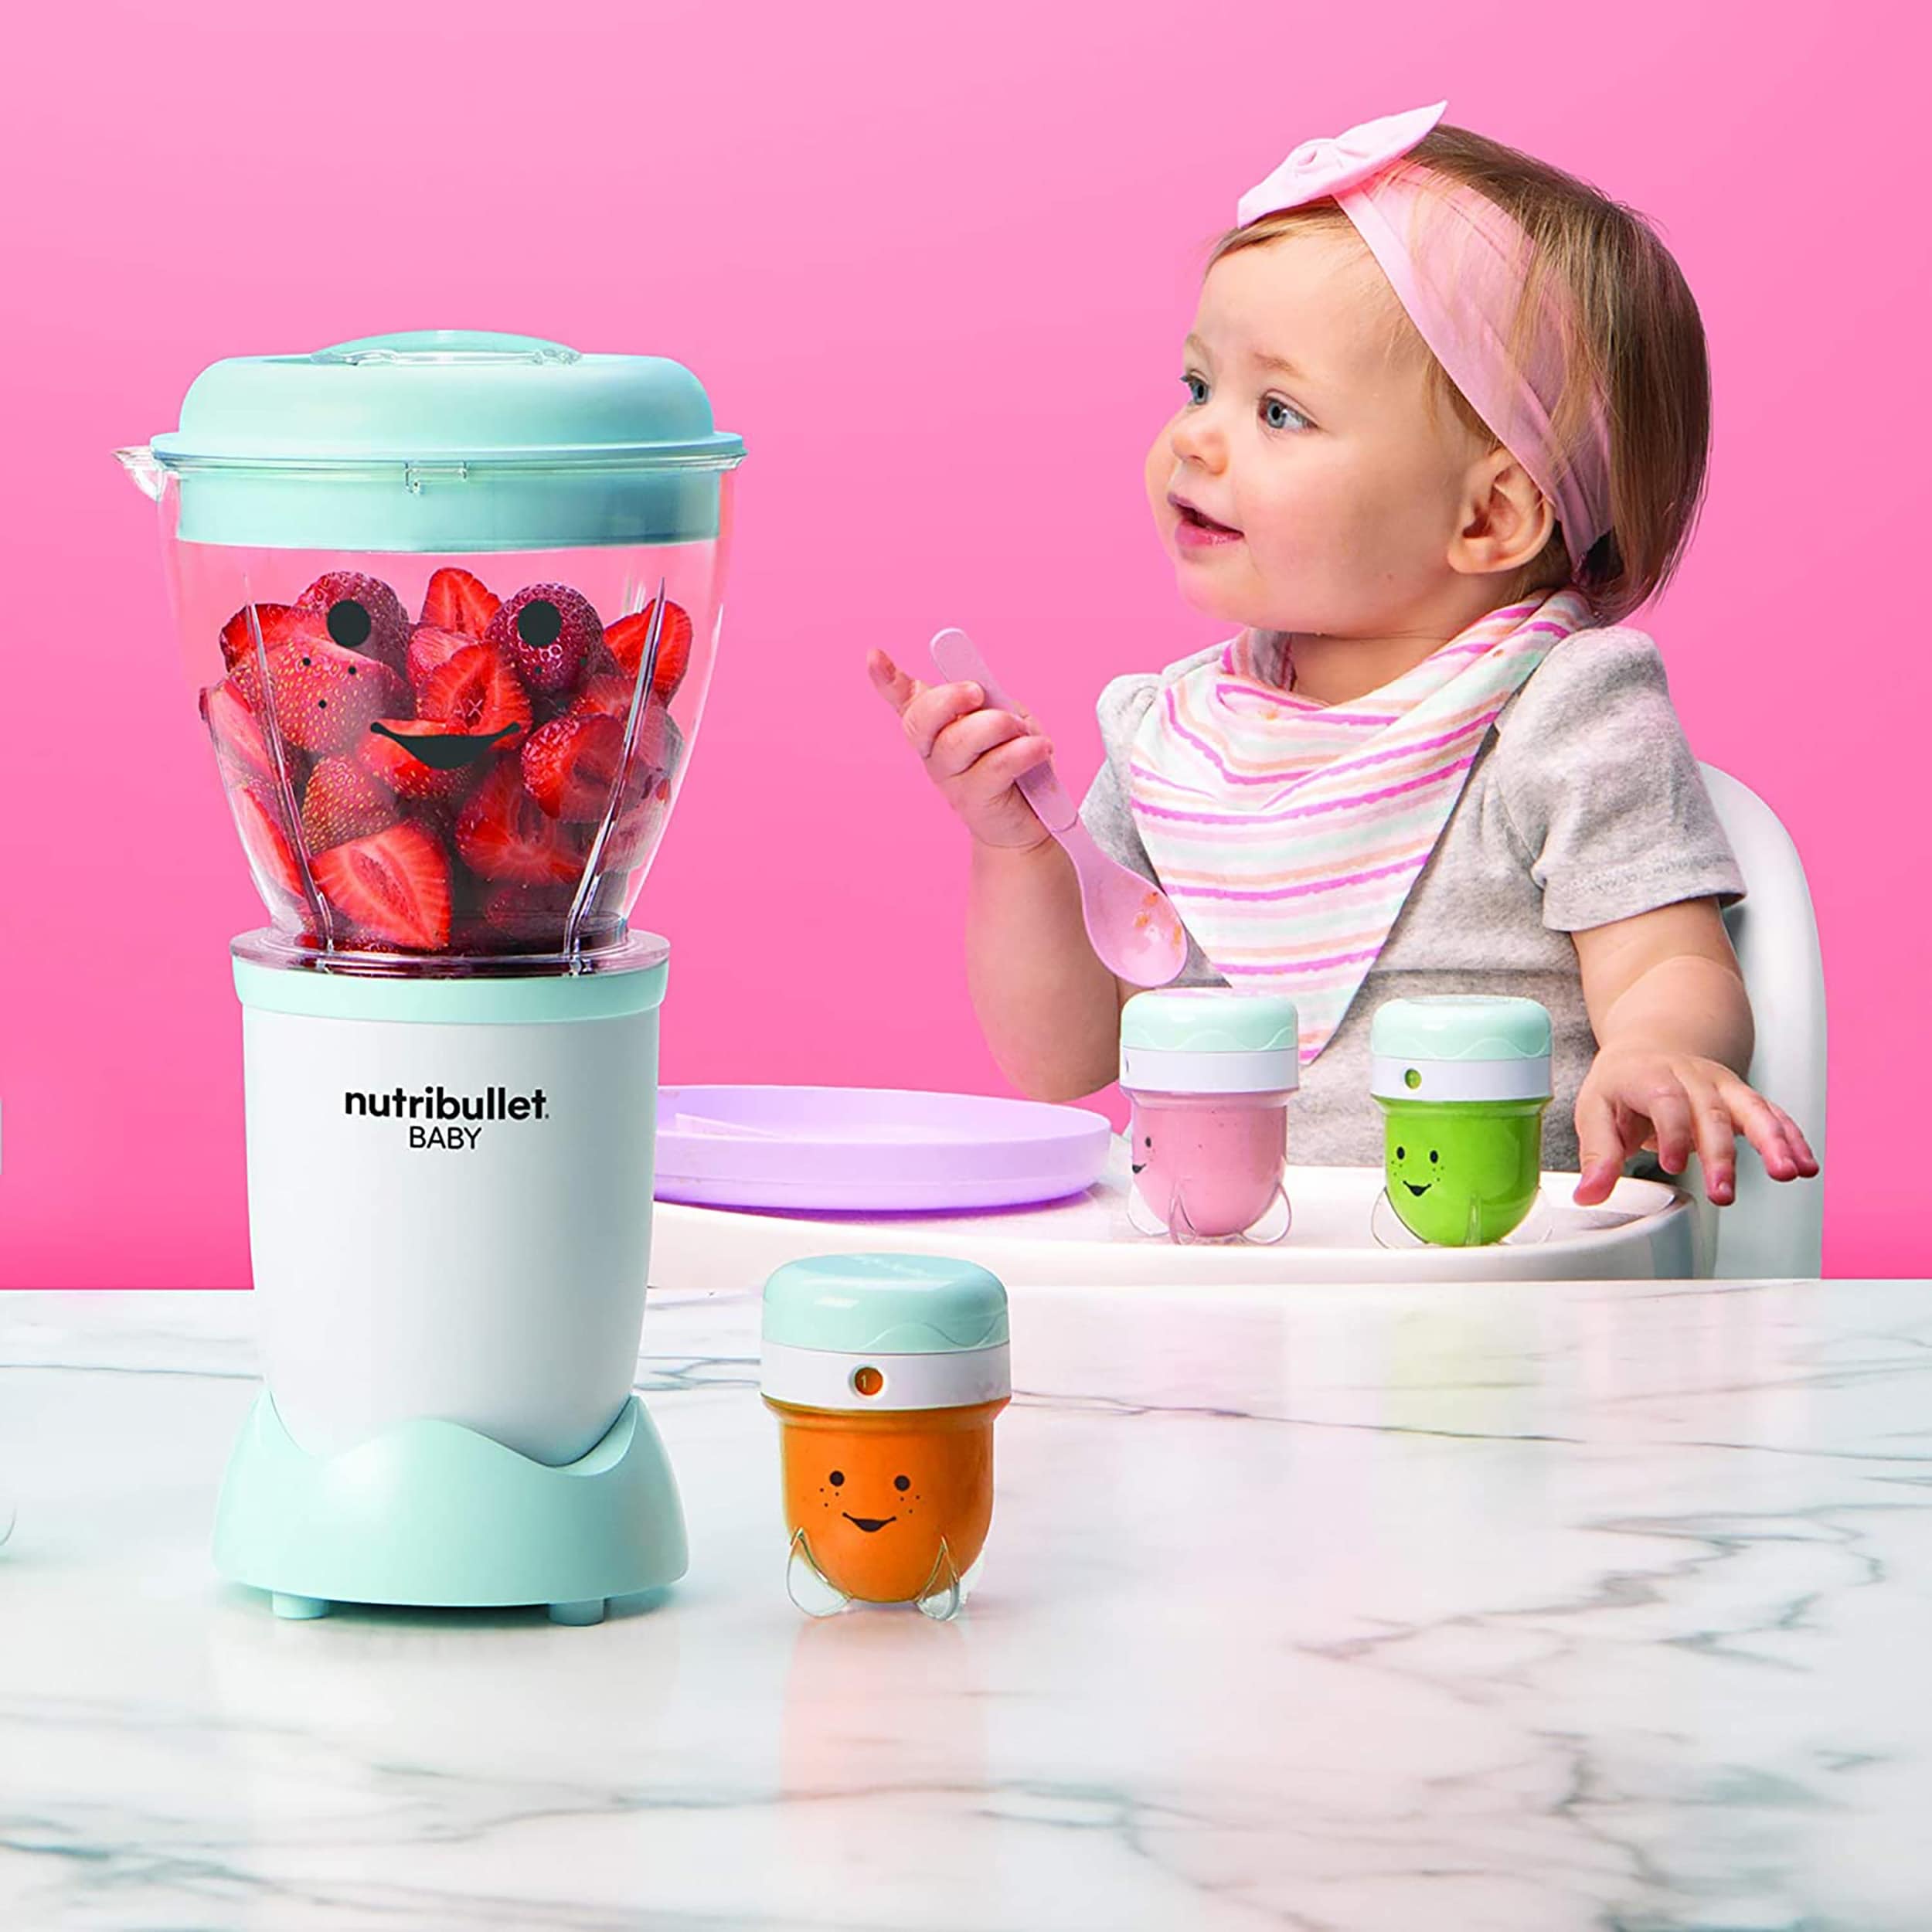 https://ak1.ostkcdn.com/images/products/is/images/direct/94f3513caea2c69ba8caec7698c636ebbab4e4fa/NutriBullet-NBY-50100-NutriBullet-Baby.jpg